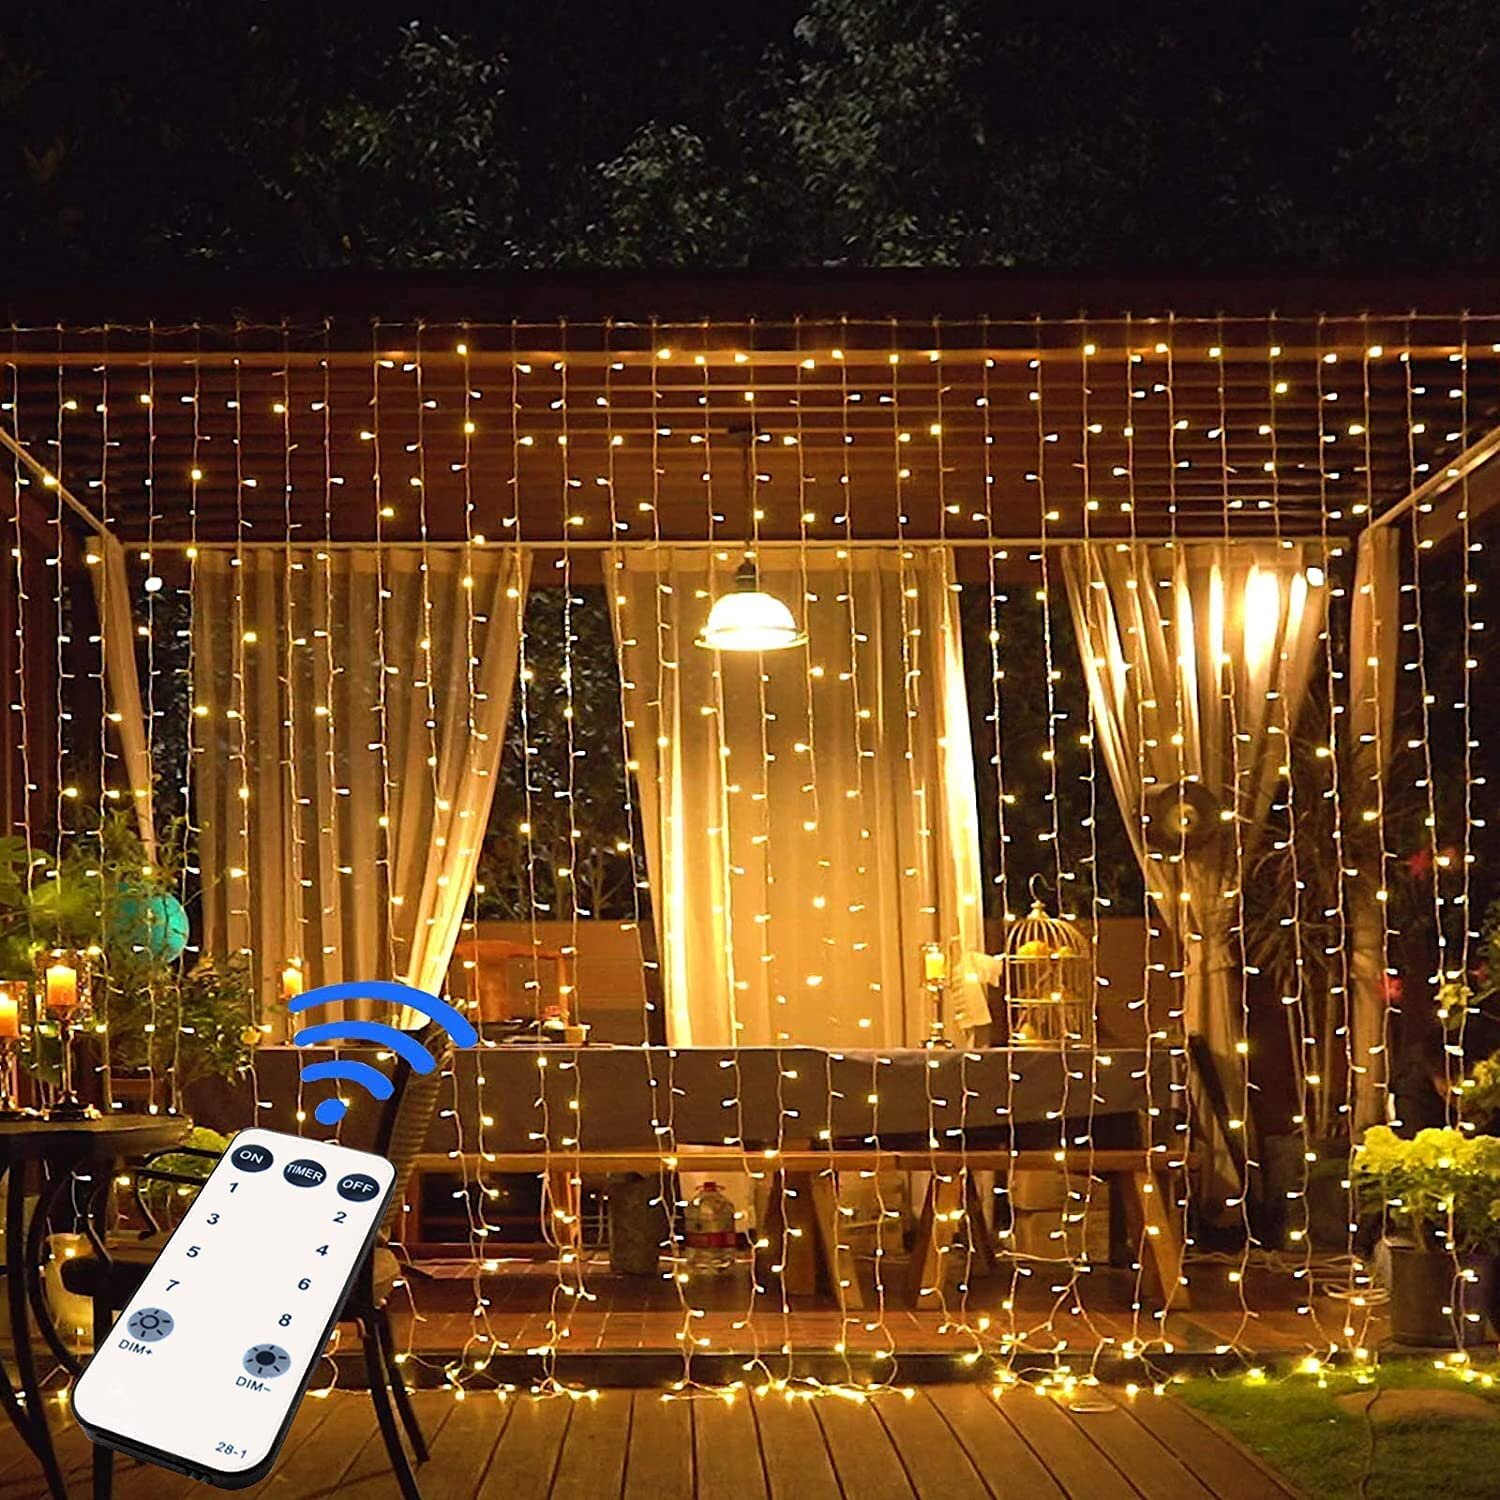 Details about   200/300LEDs 3M Solar Power Curtain Lights Fairy String Outdoor Xmas Party Garden 